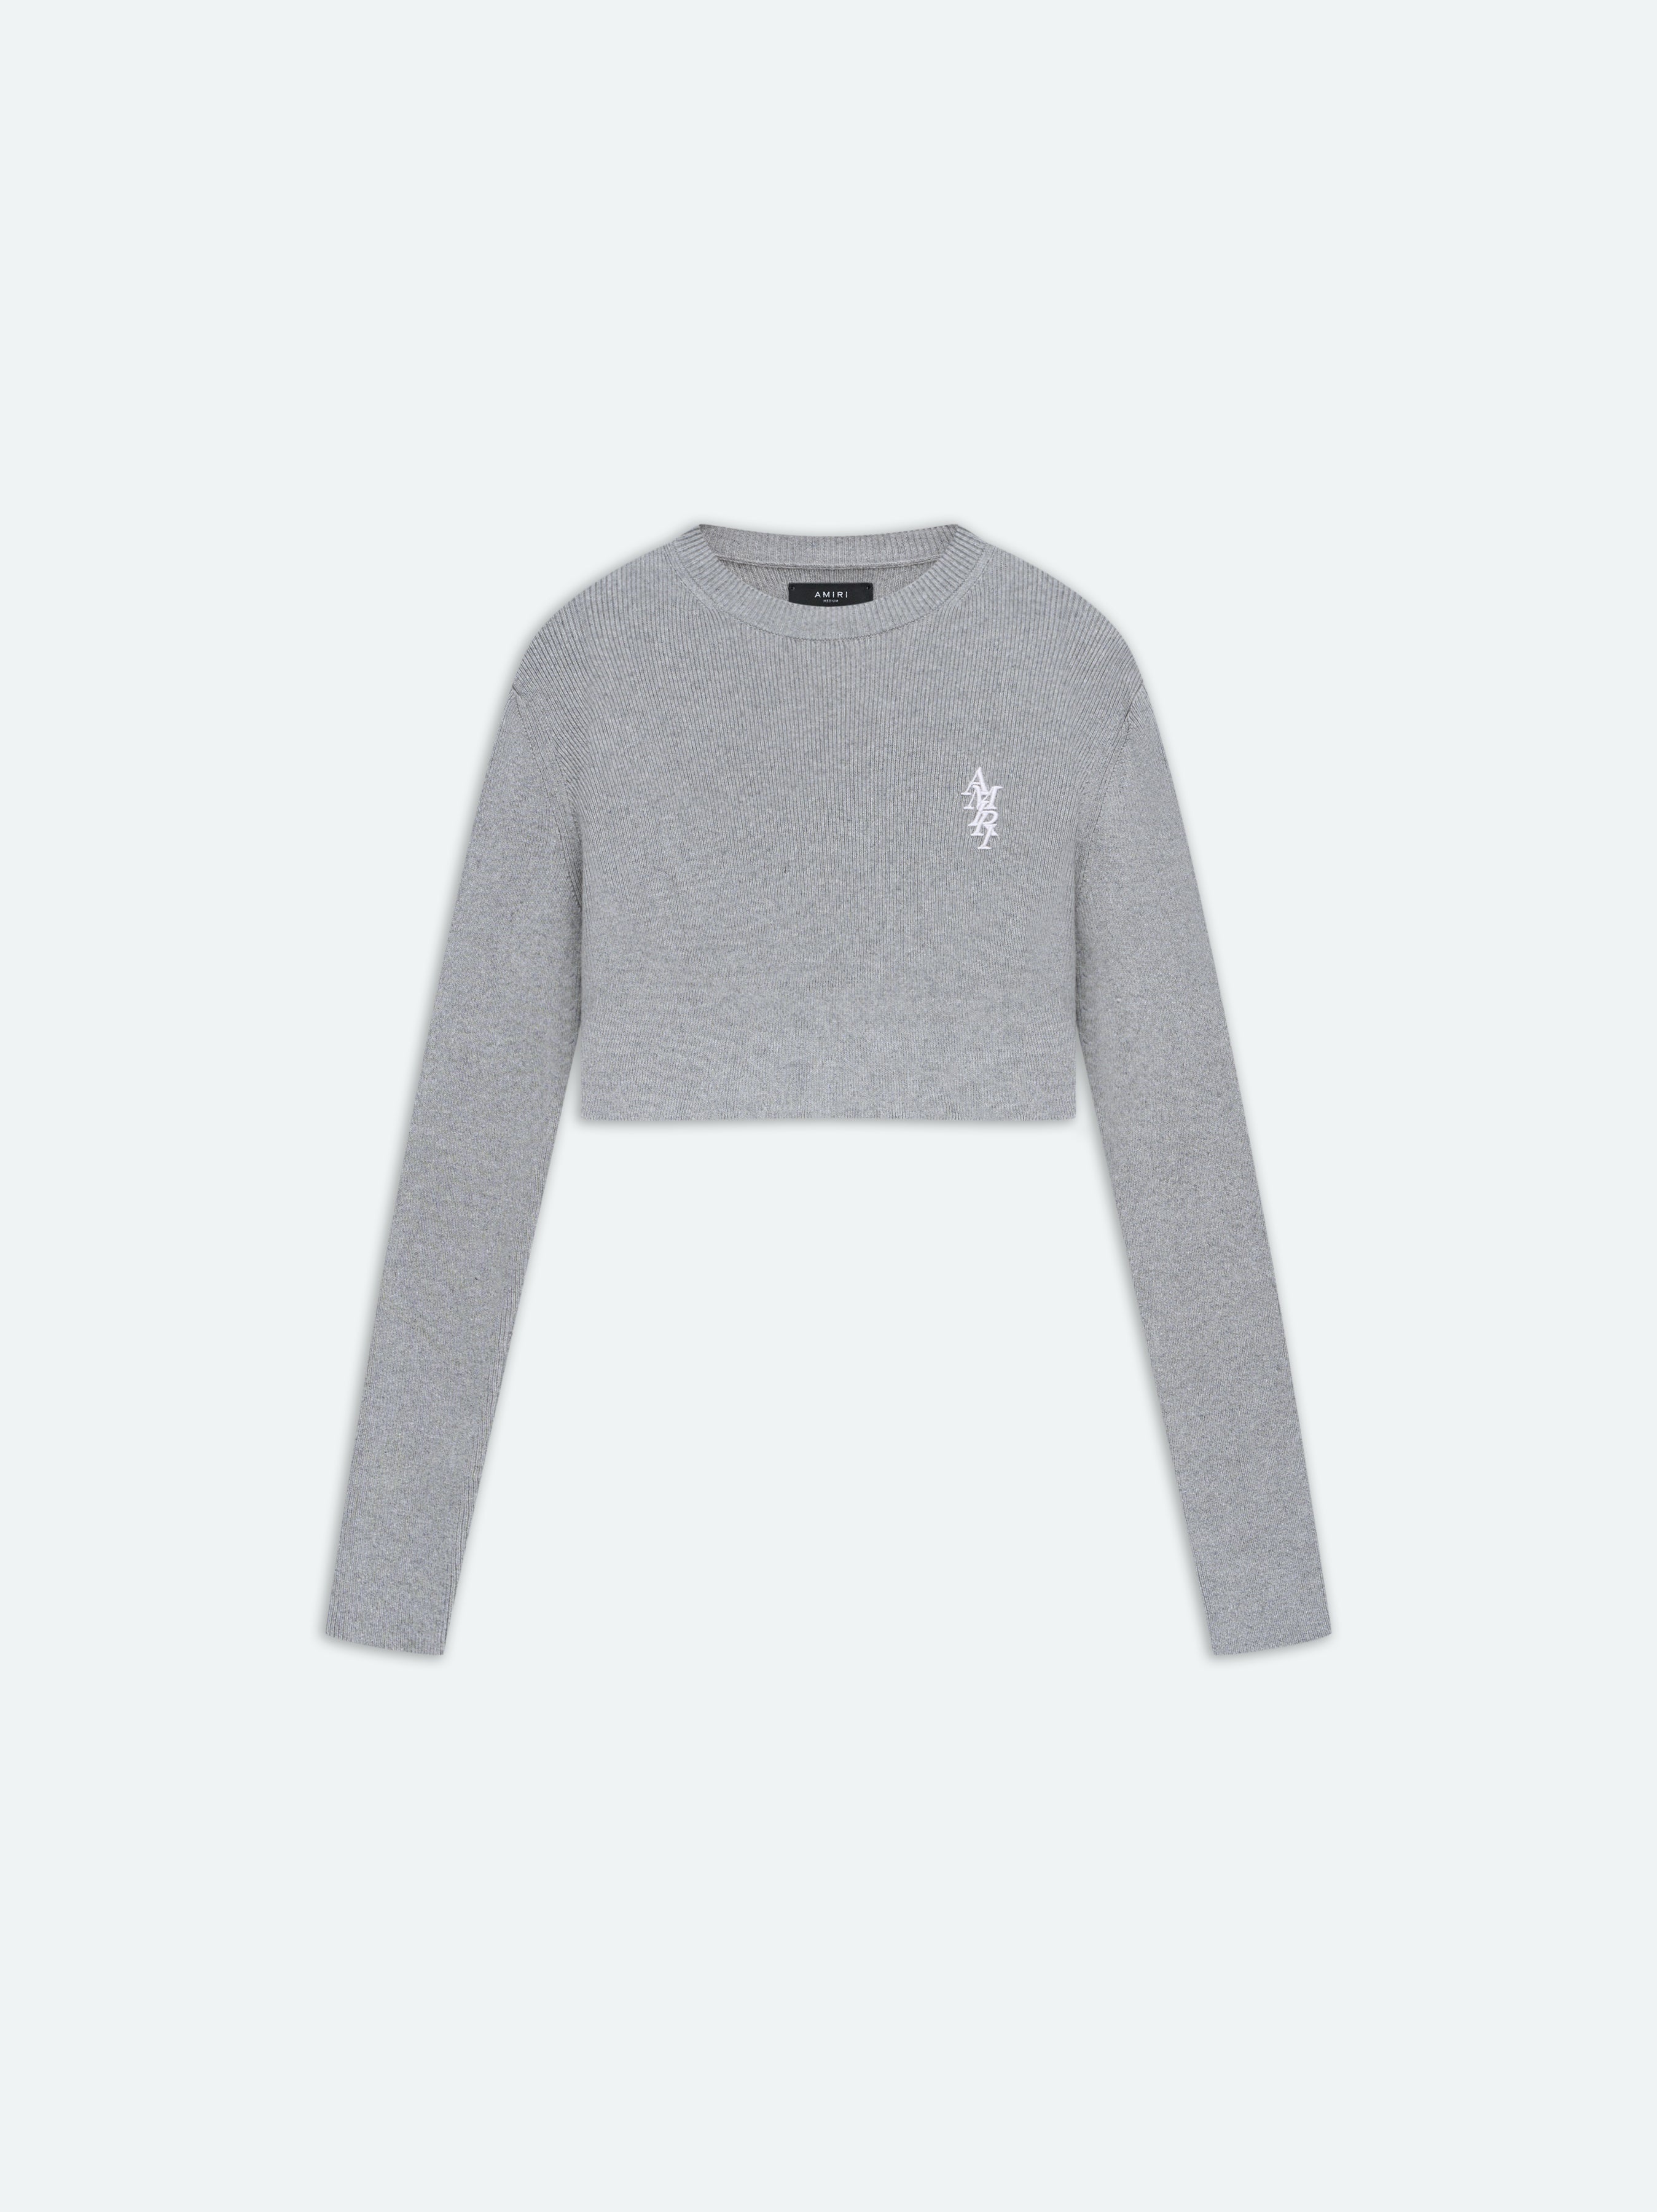 Product WOMEN - AMIRI STACK CROPPED CREWNECK - Grey featured image